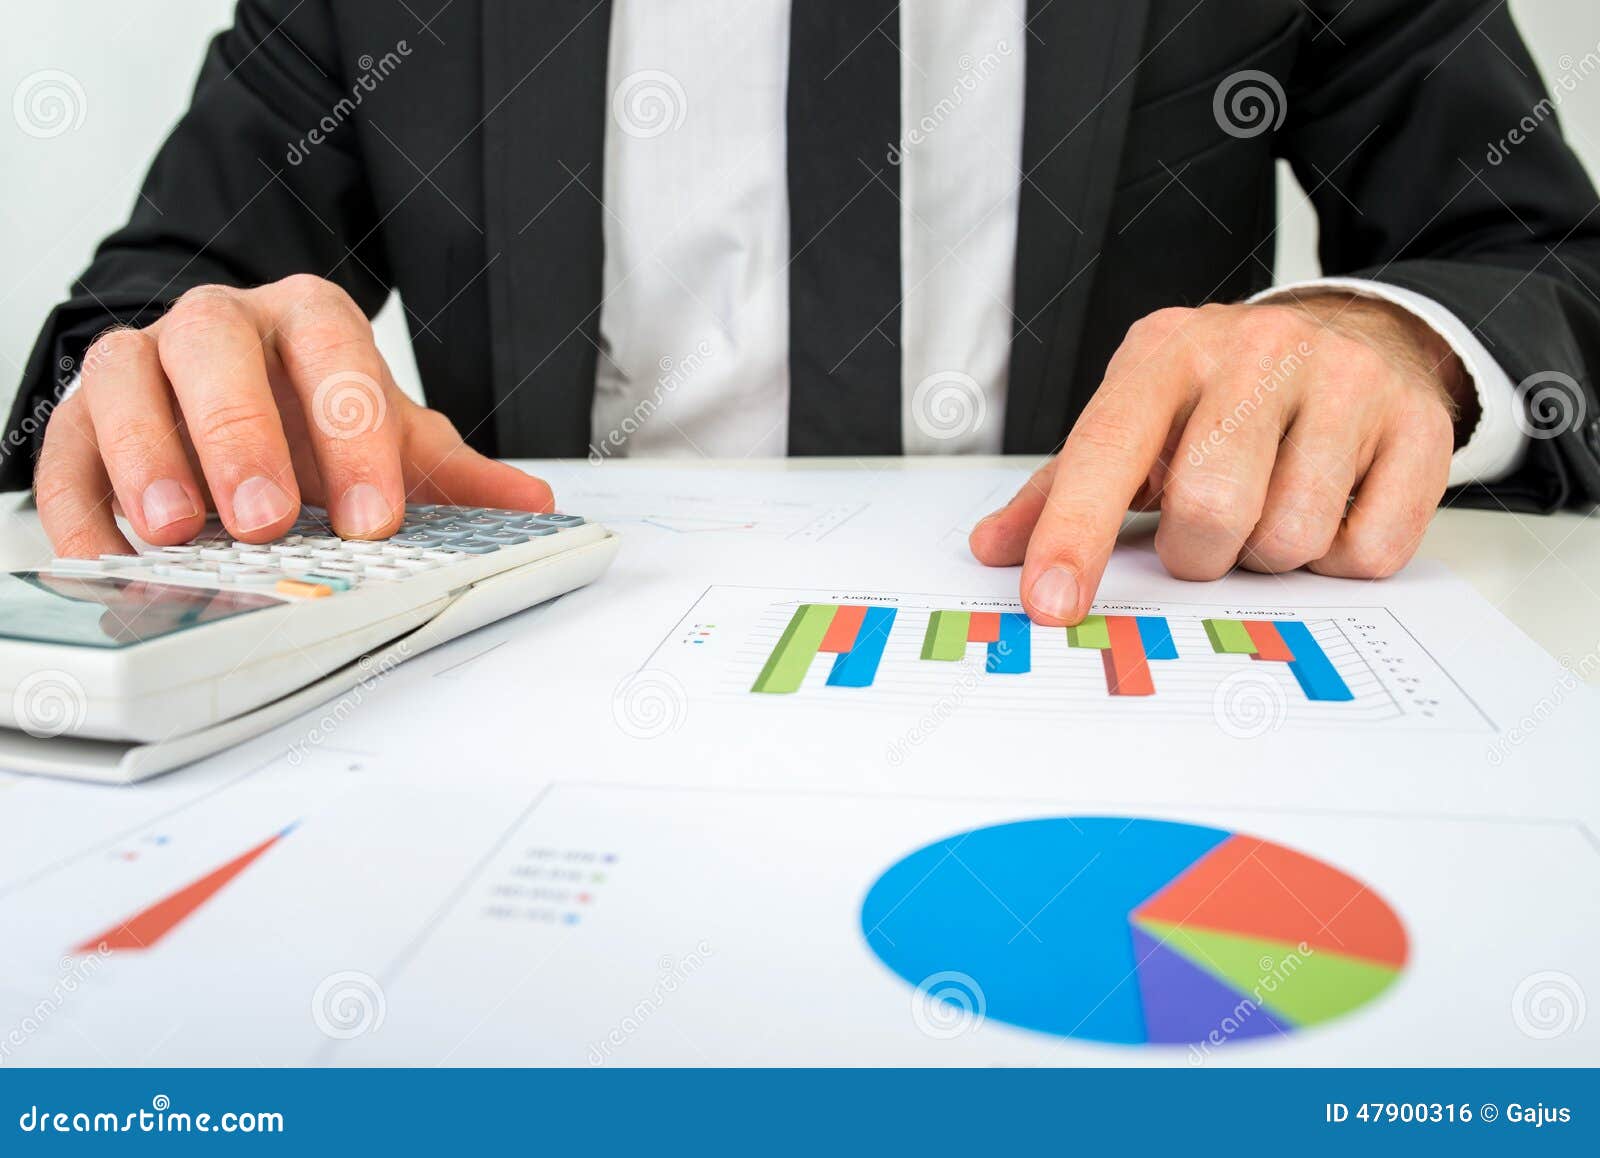 front view of the hands of a accountant analysing a bar graph